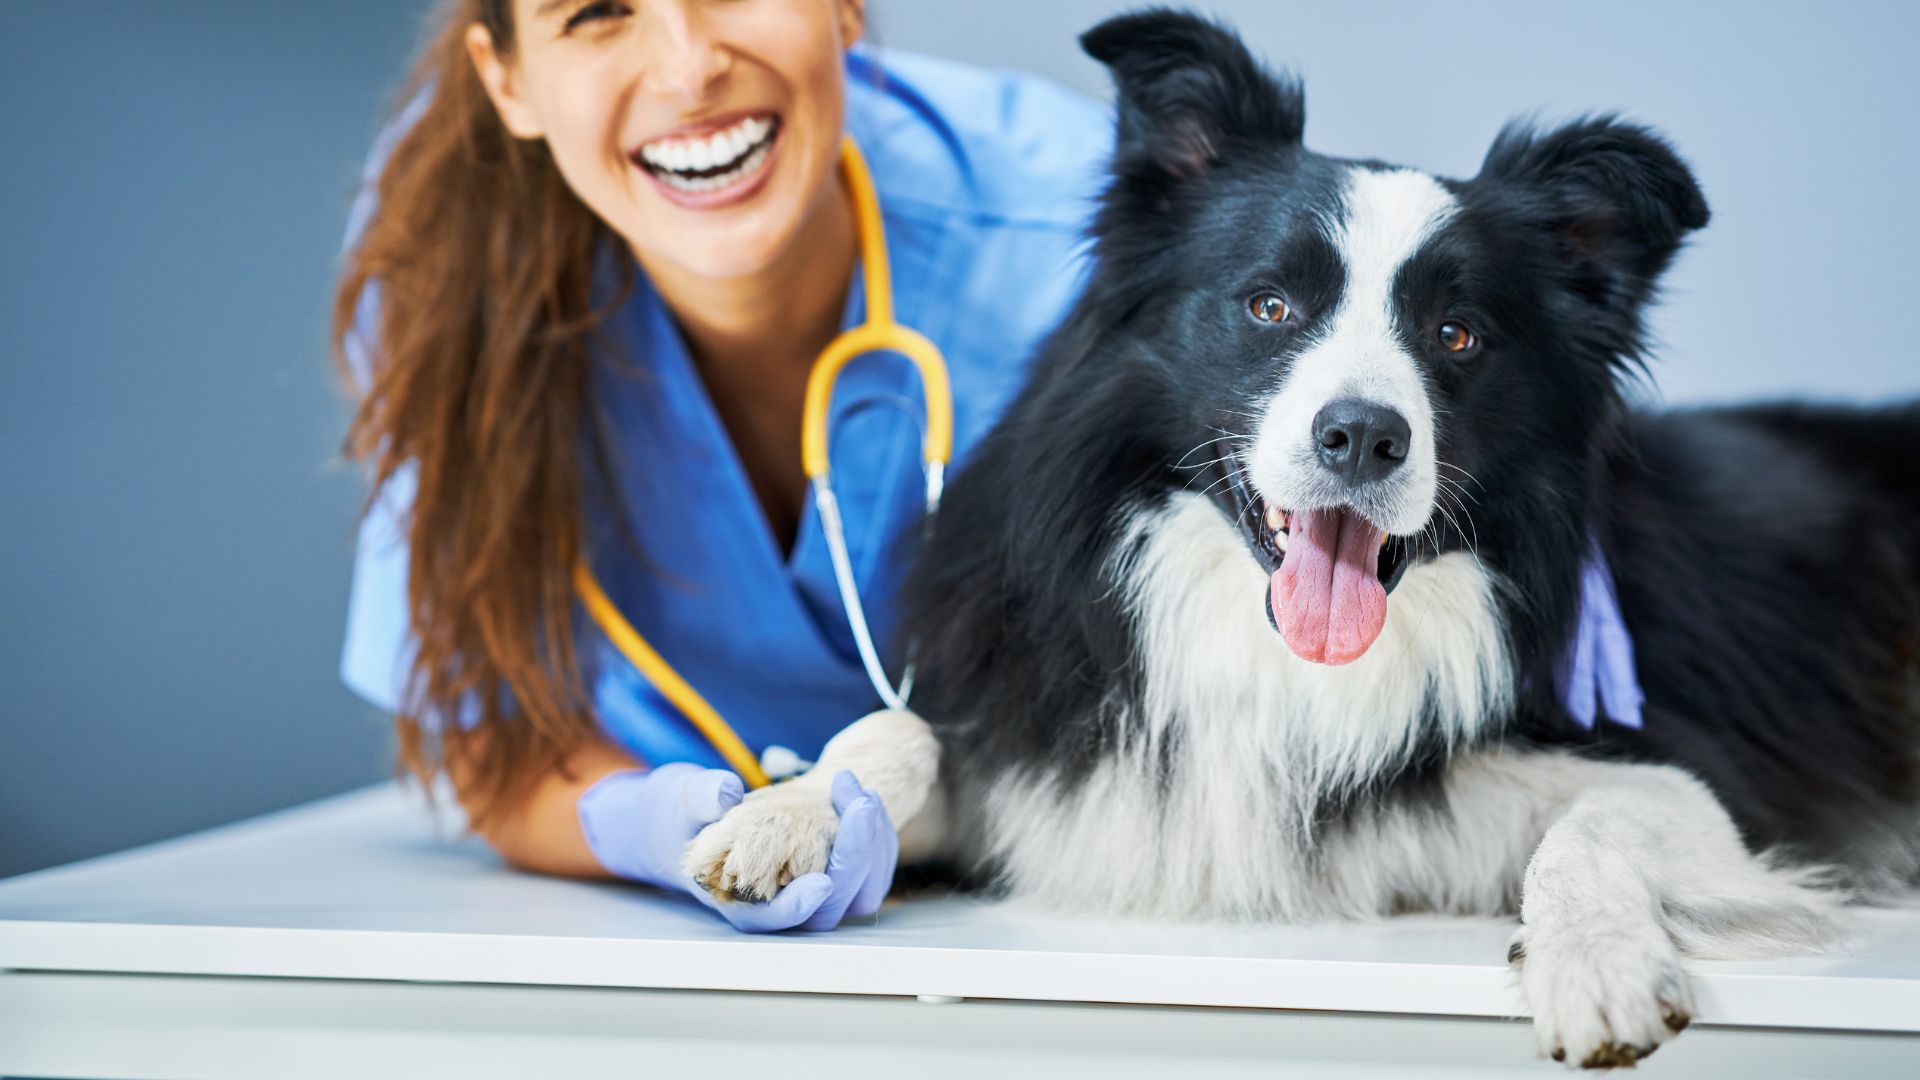 A person with a stethoscope and a dog